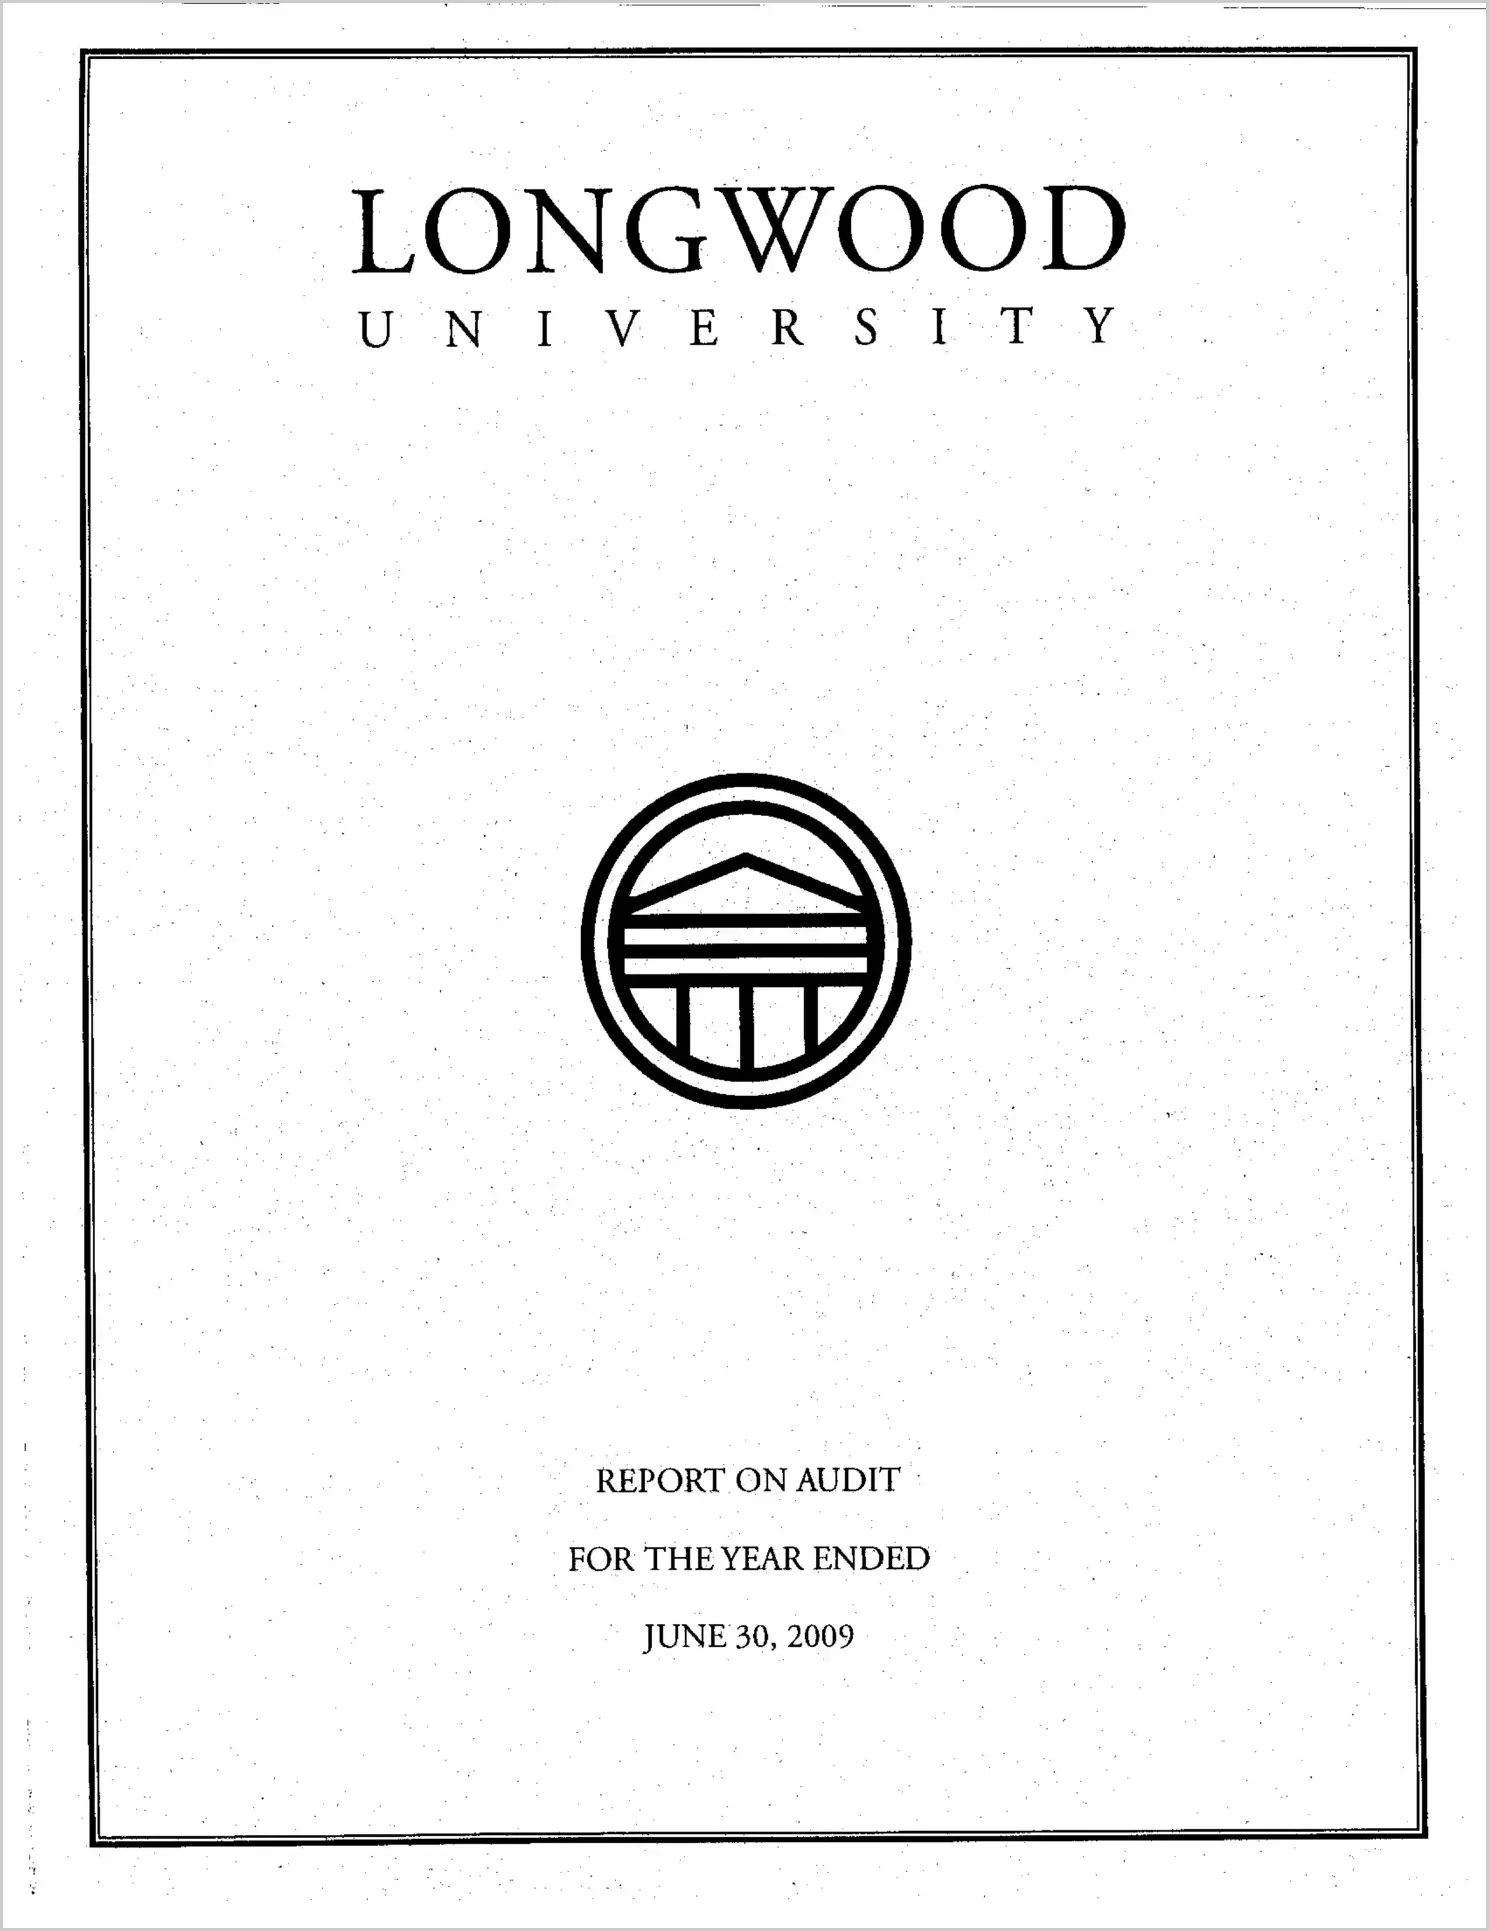 Longwood University Financial Statements report on audit for the year ended June 30, 2009